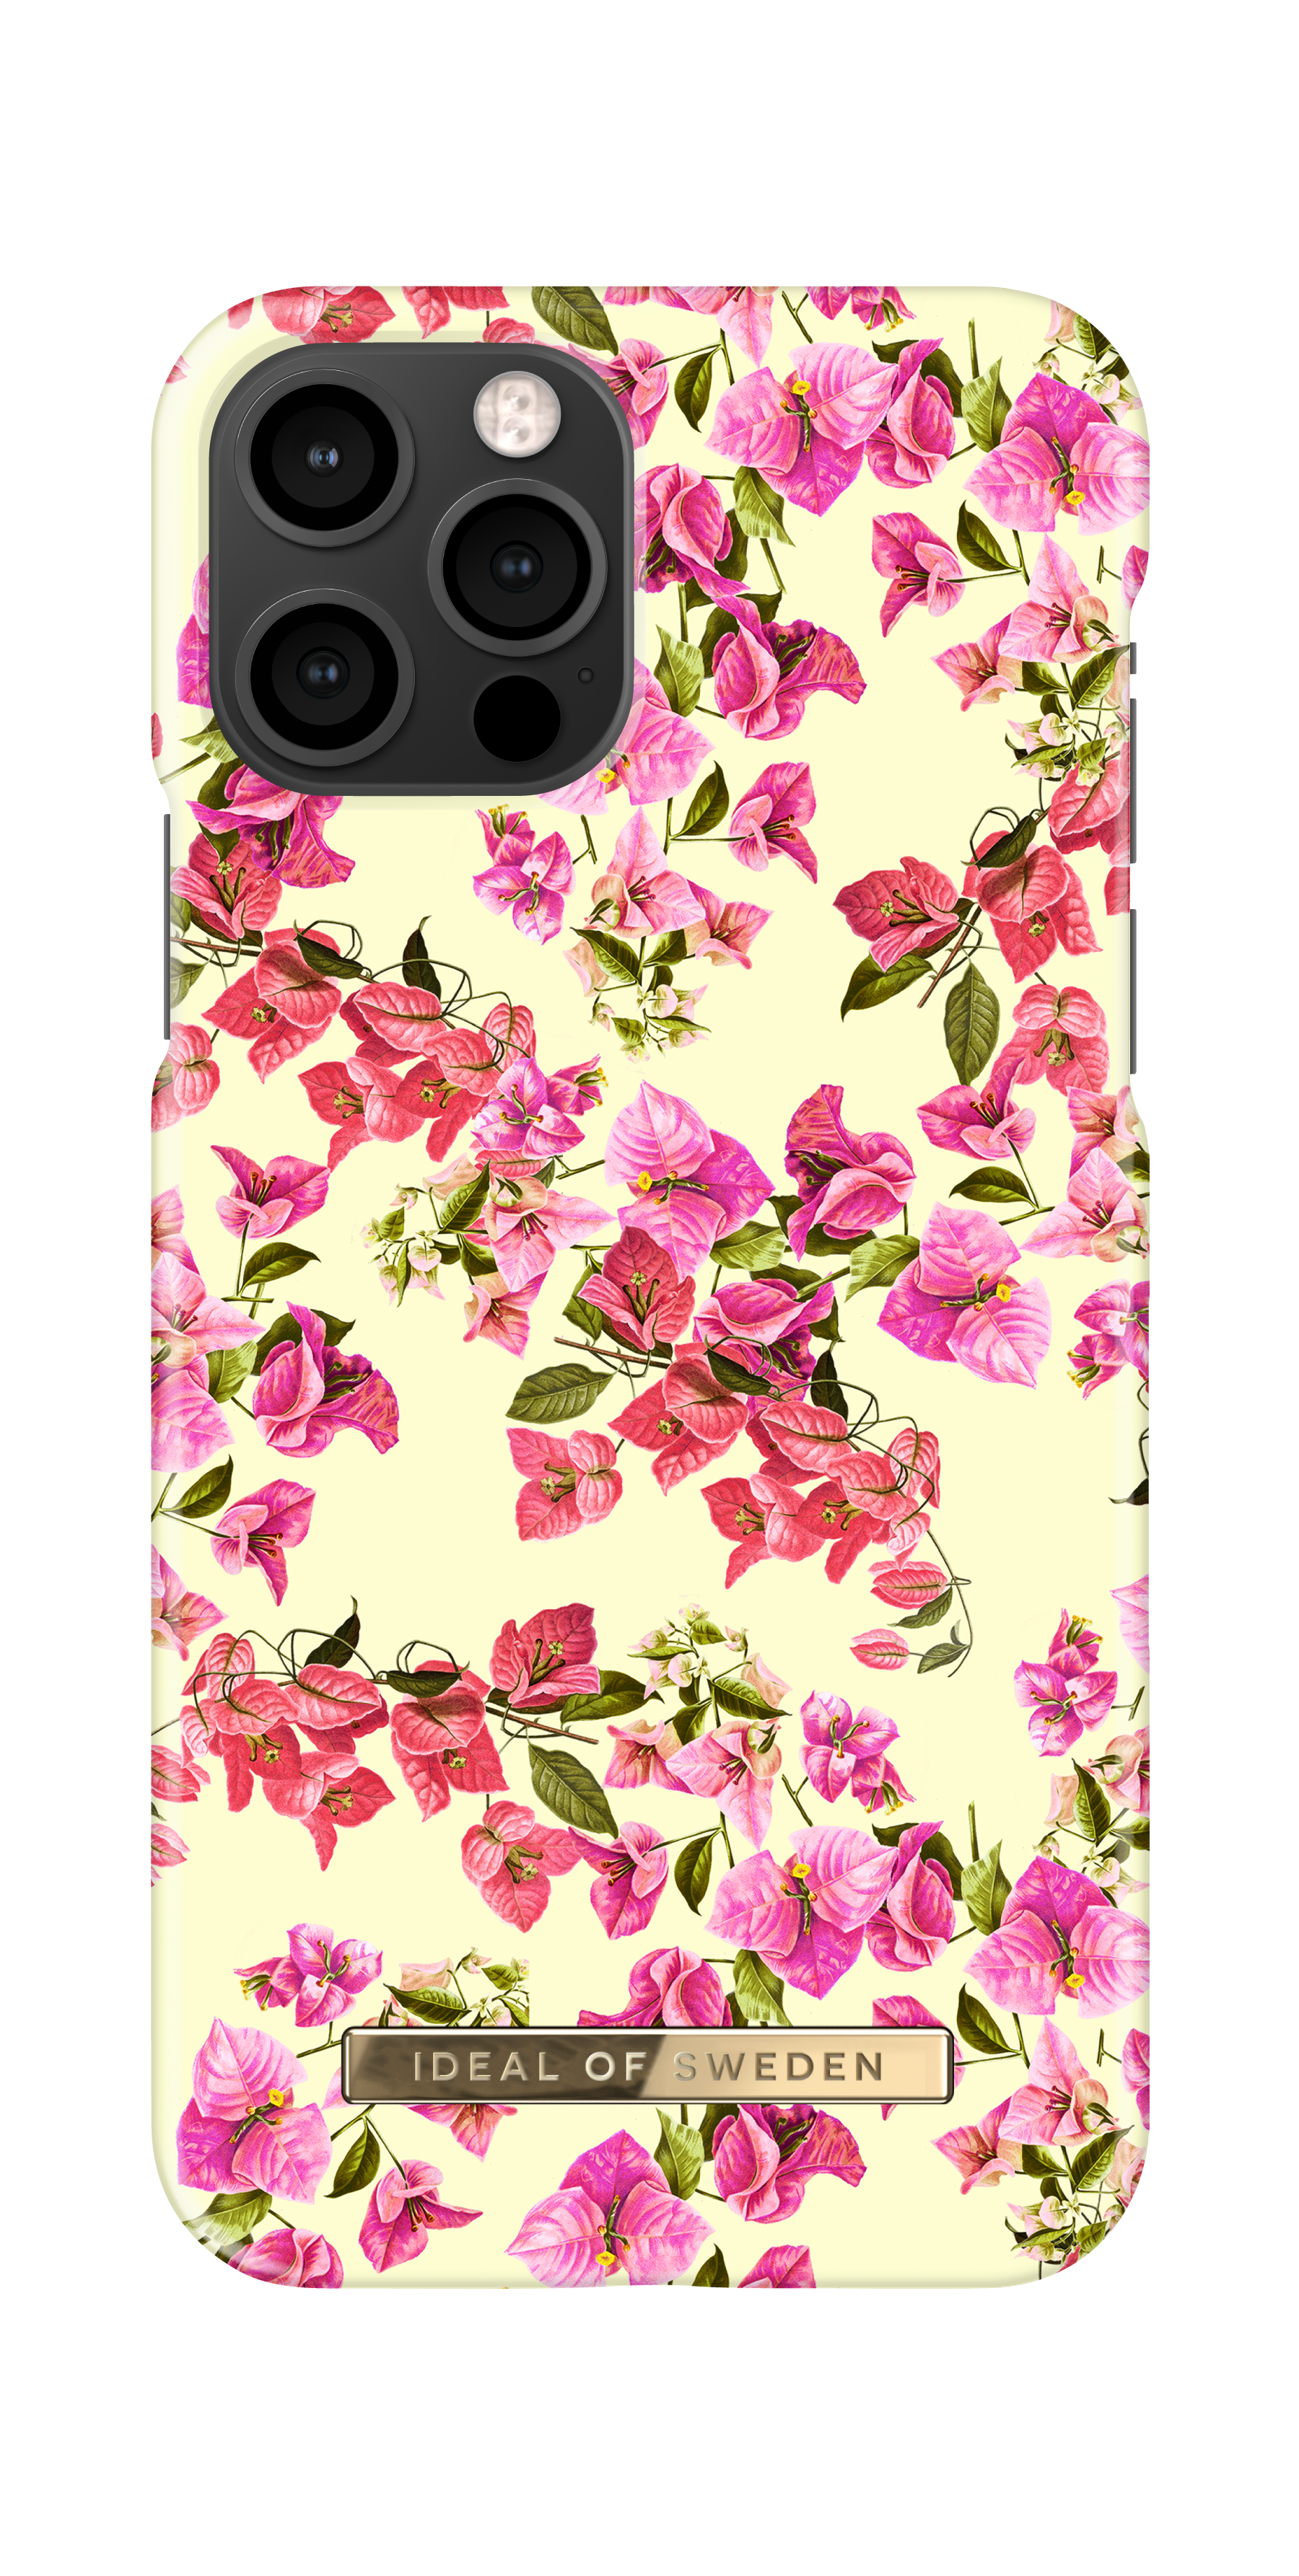 SWEDEN iPhone IDFCSS21-I2061-259, IDEAL OF 12 Lemon Backcover, 12, Bloom iPhone Apple, Pro,